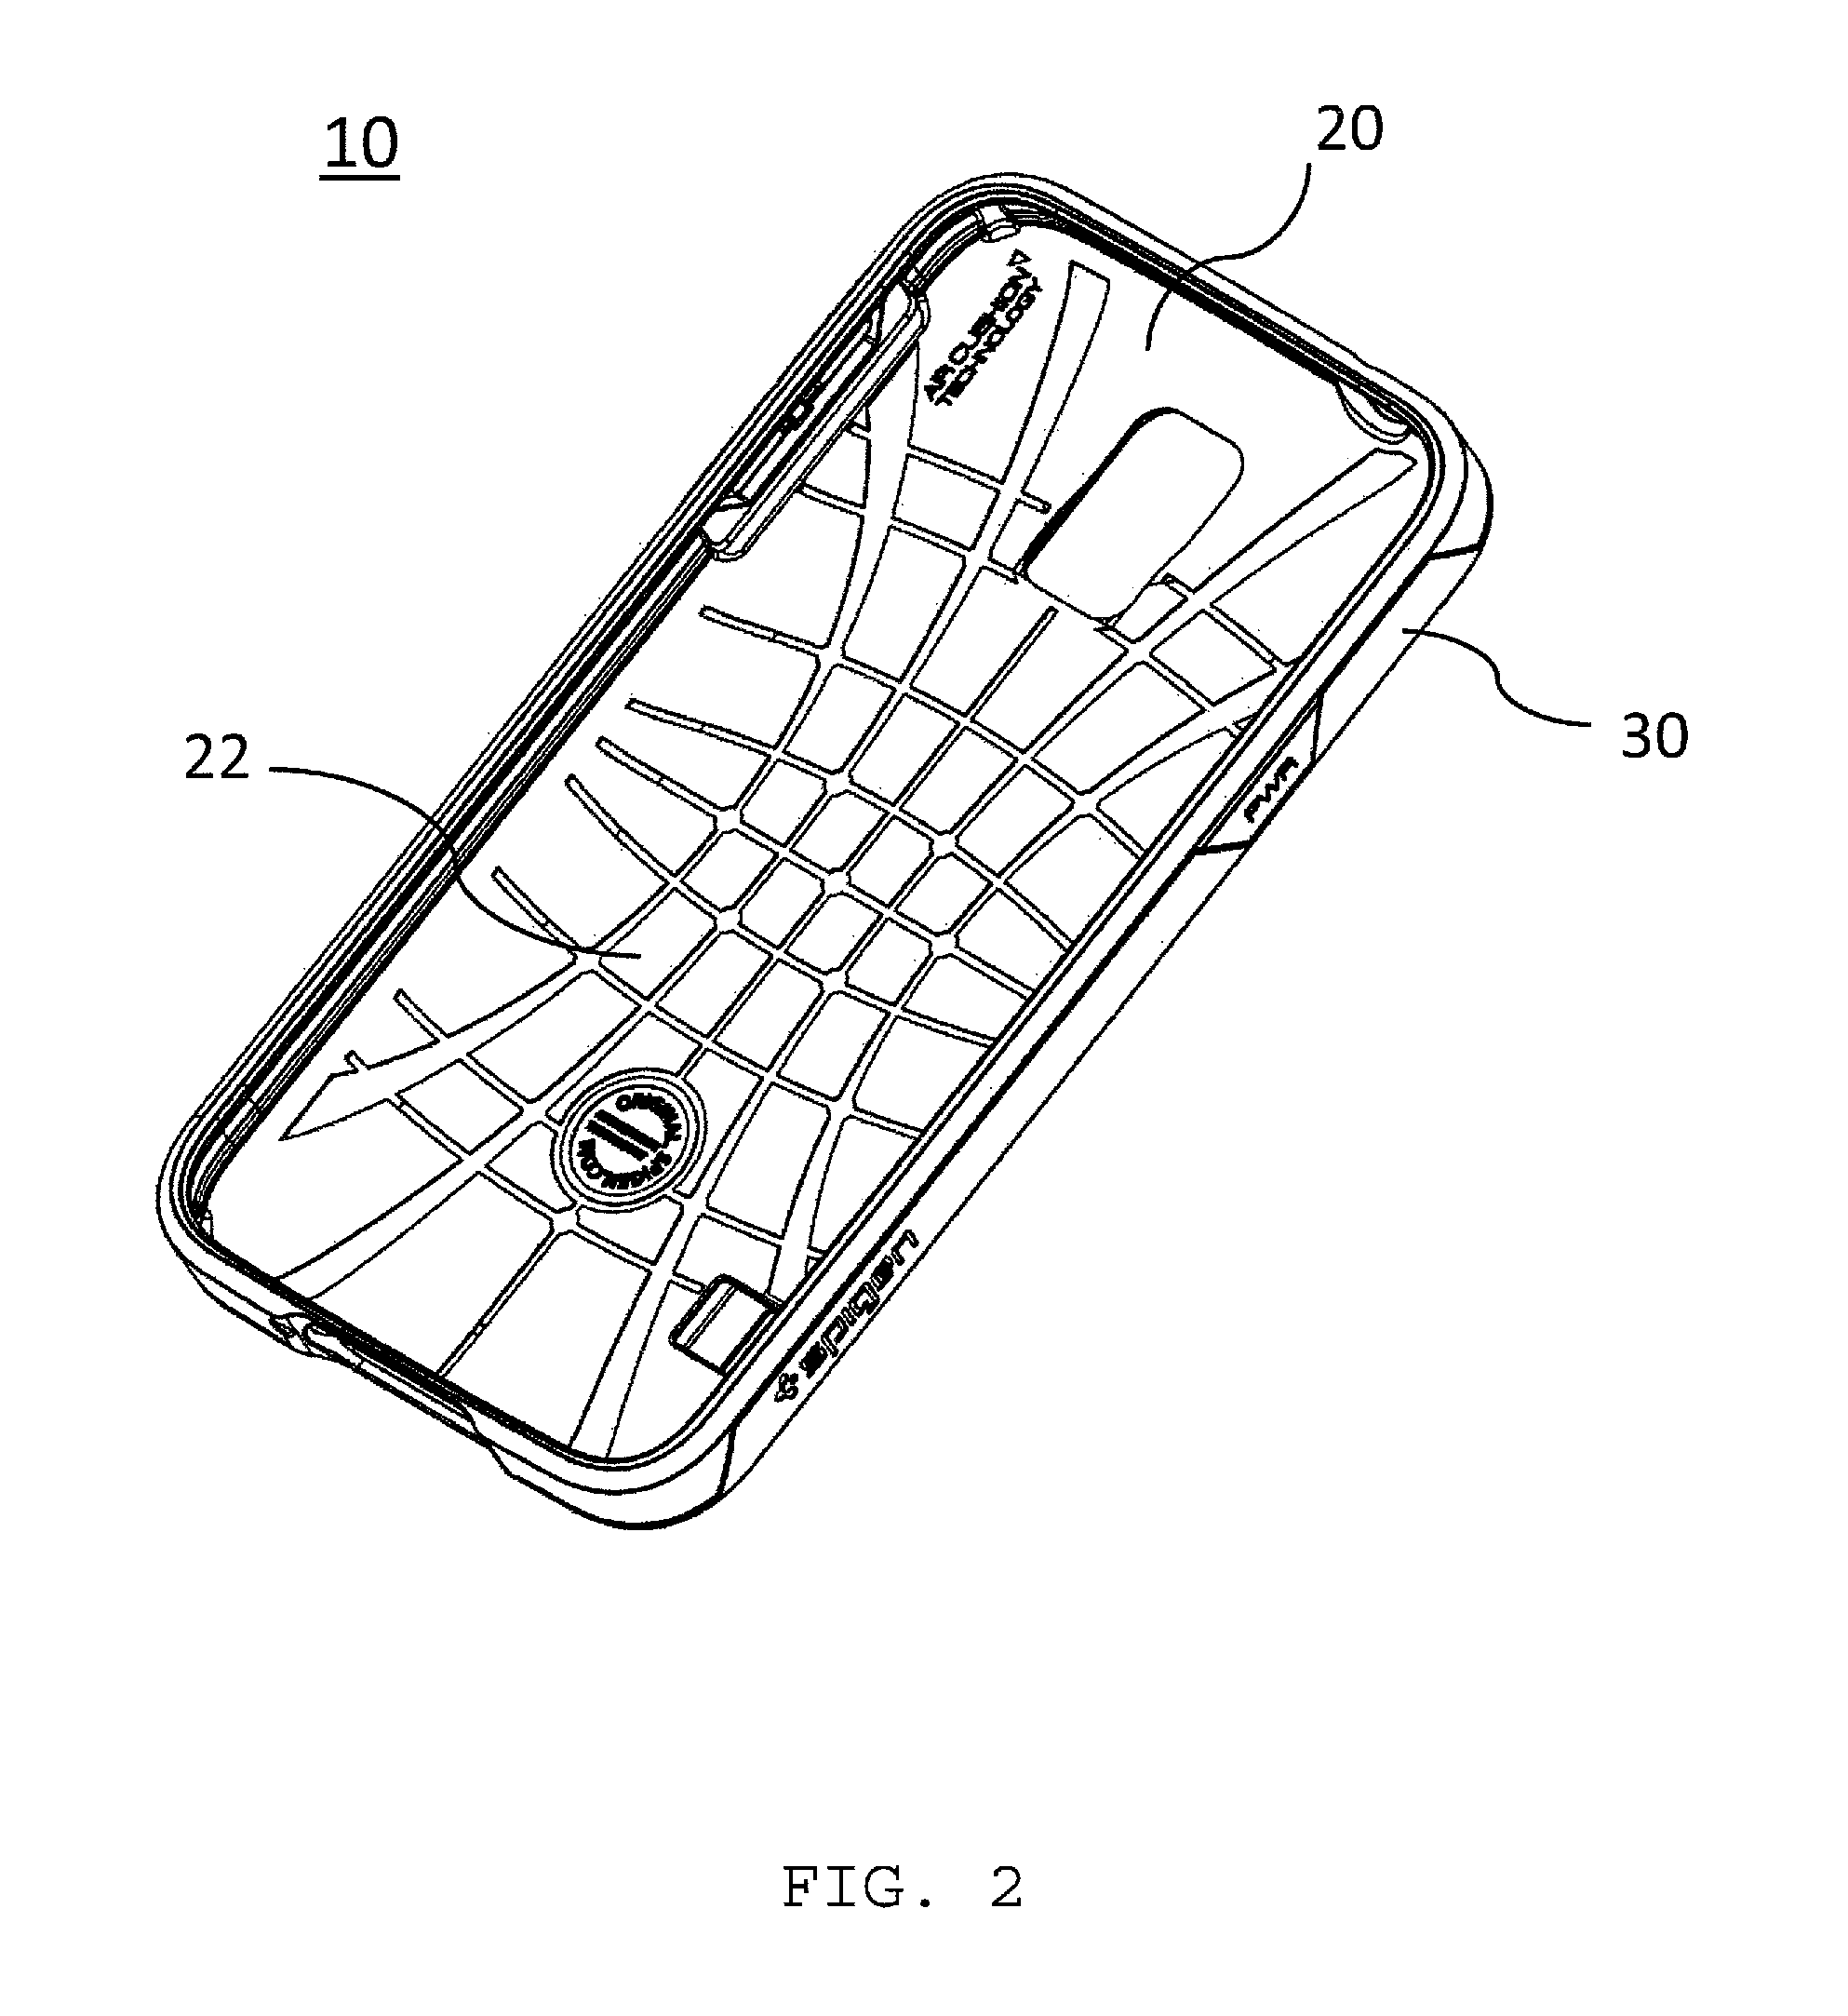 Case having a storage compartment for electronic devices